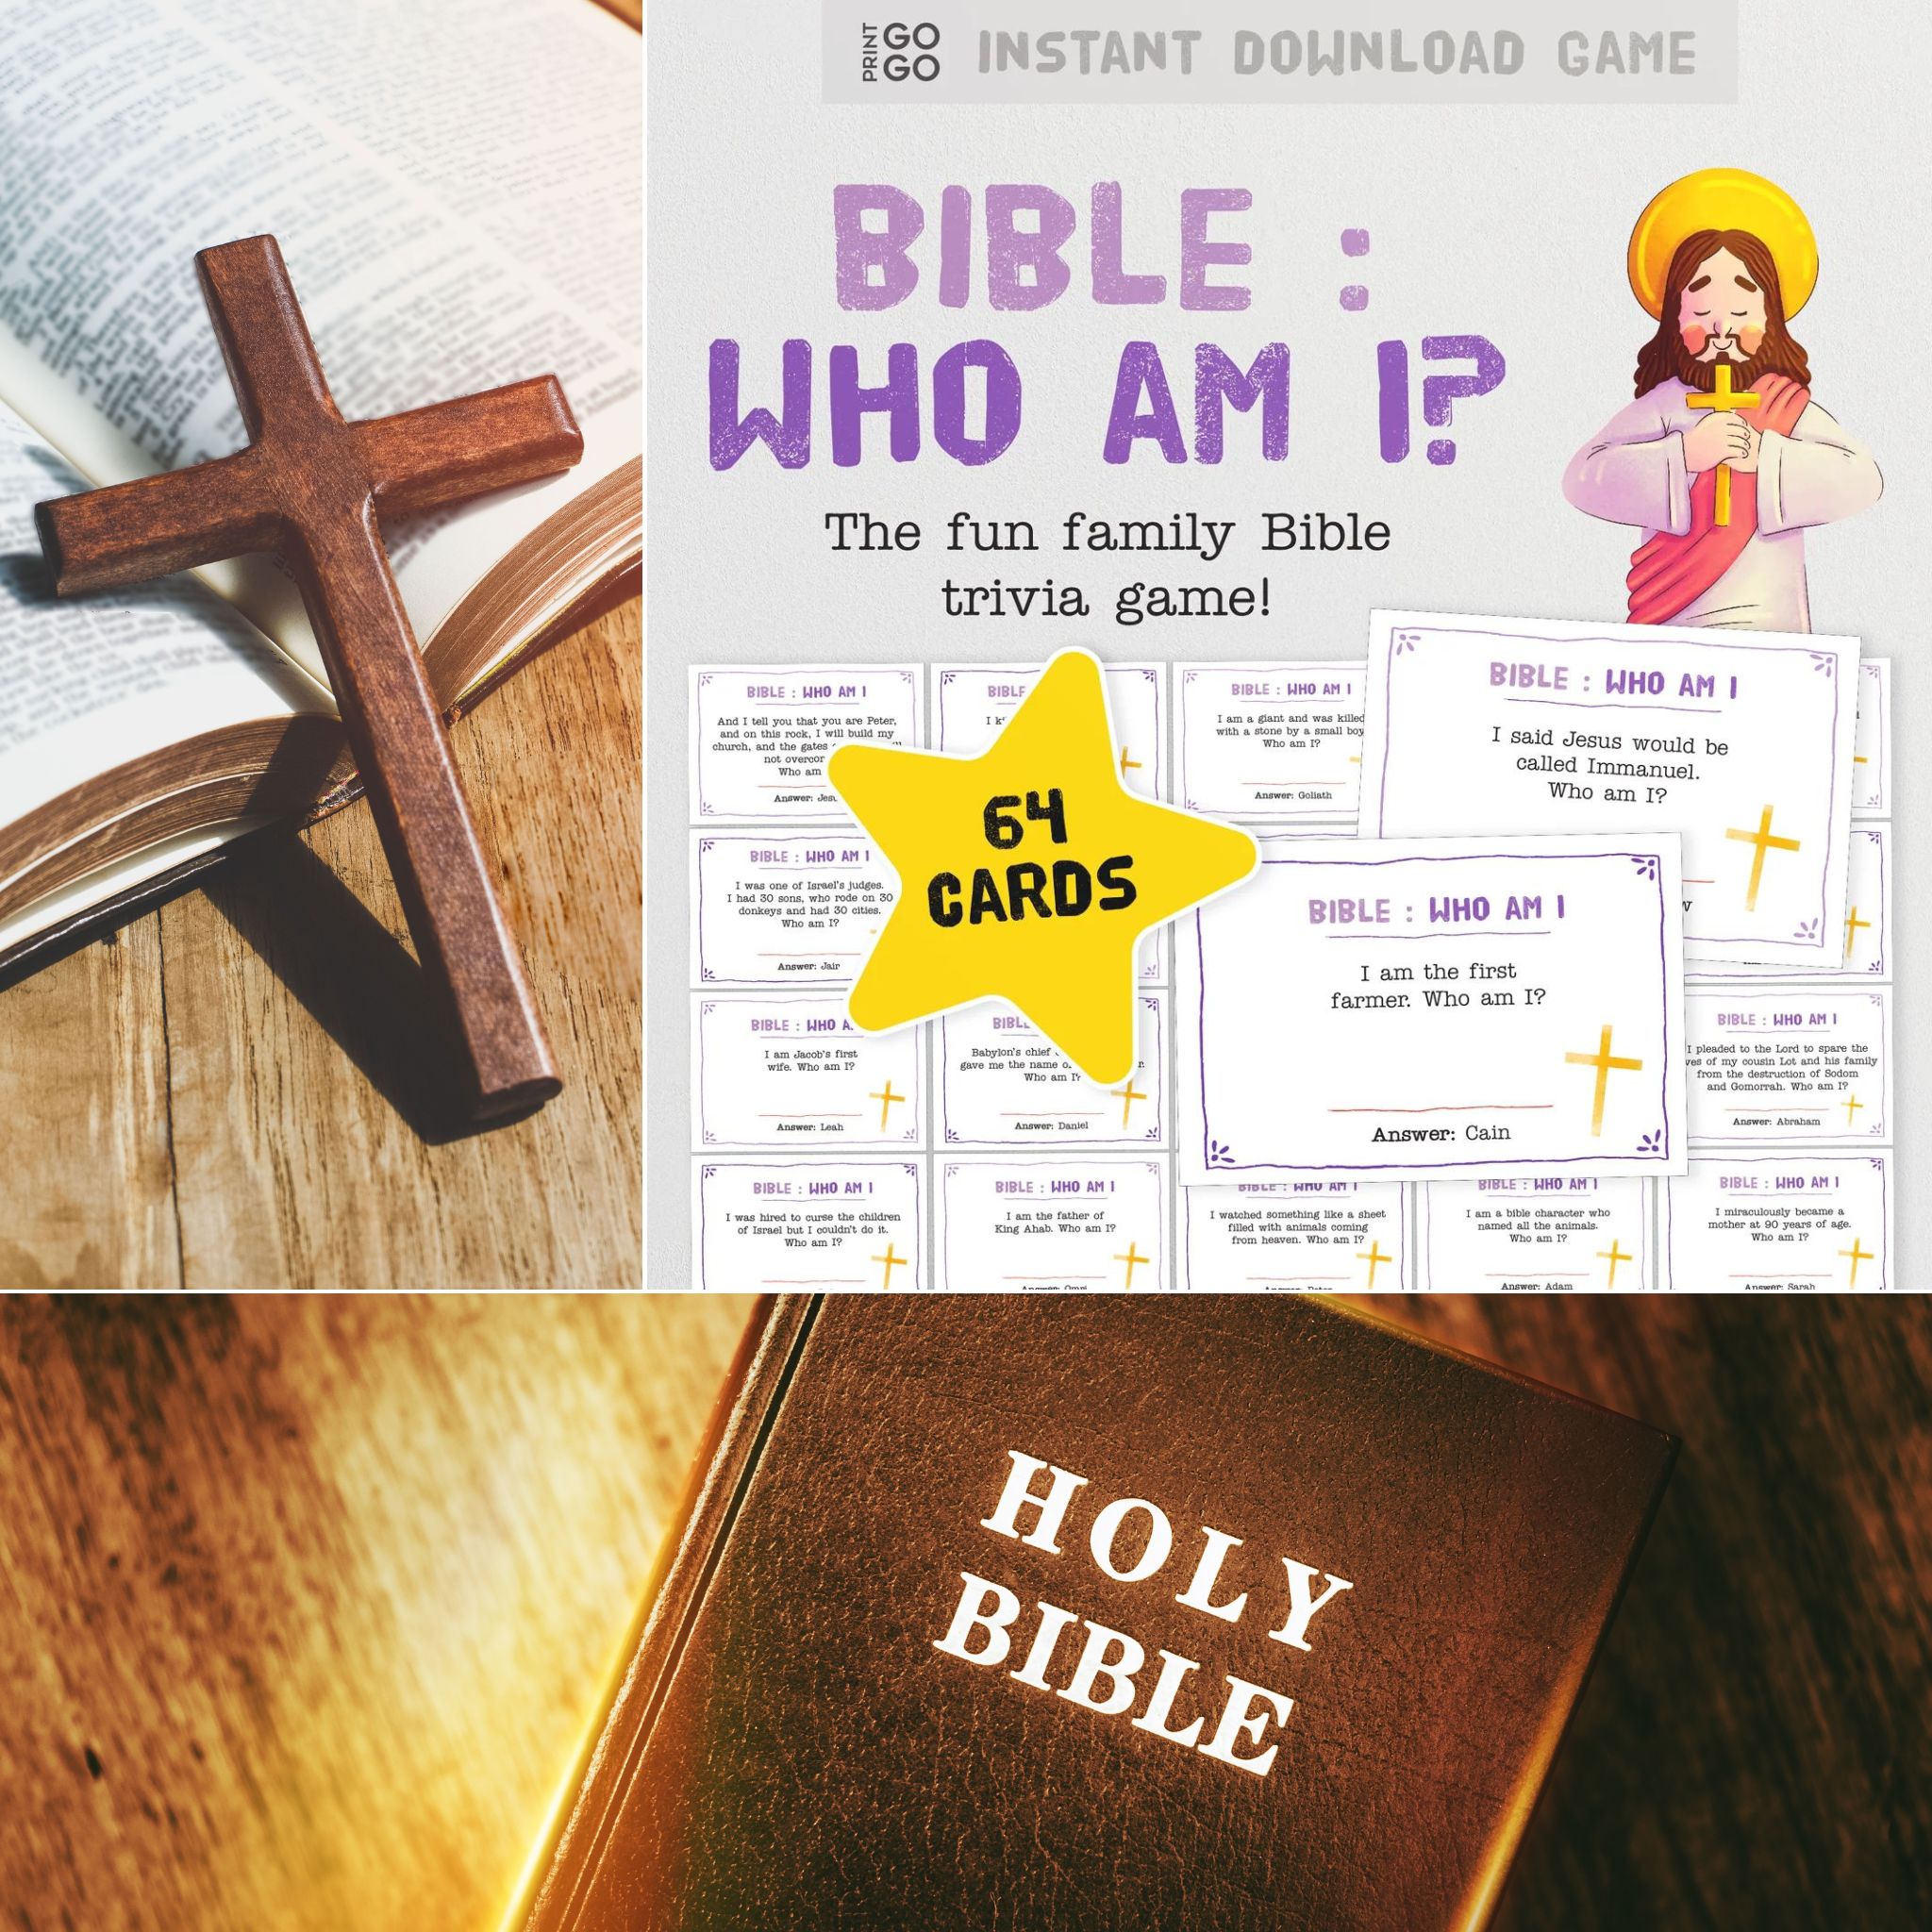 Who Am I? - The Ultimate Bible Trivia Party Game